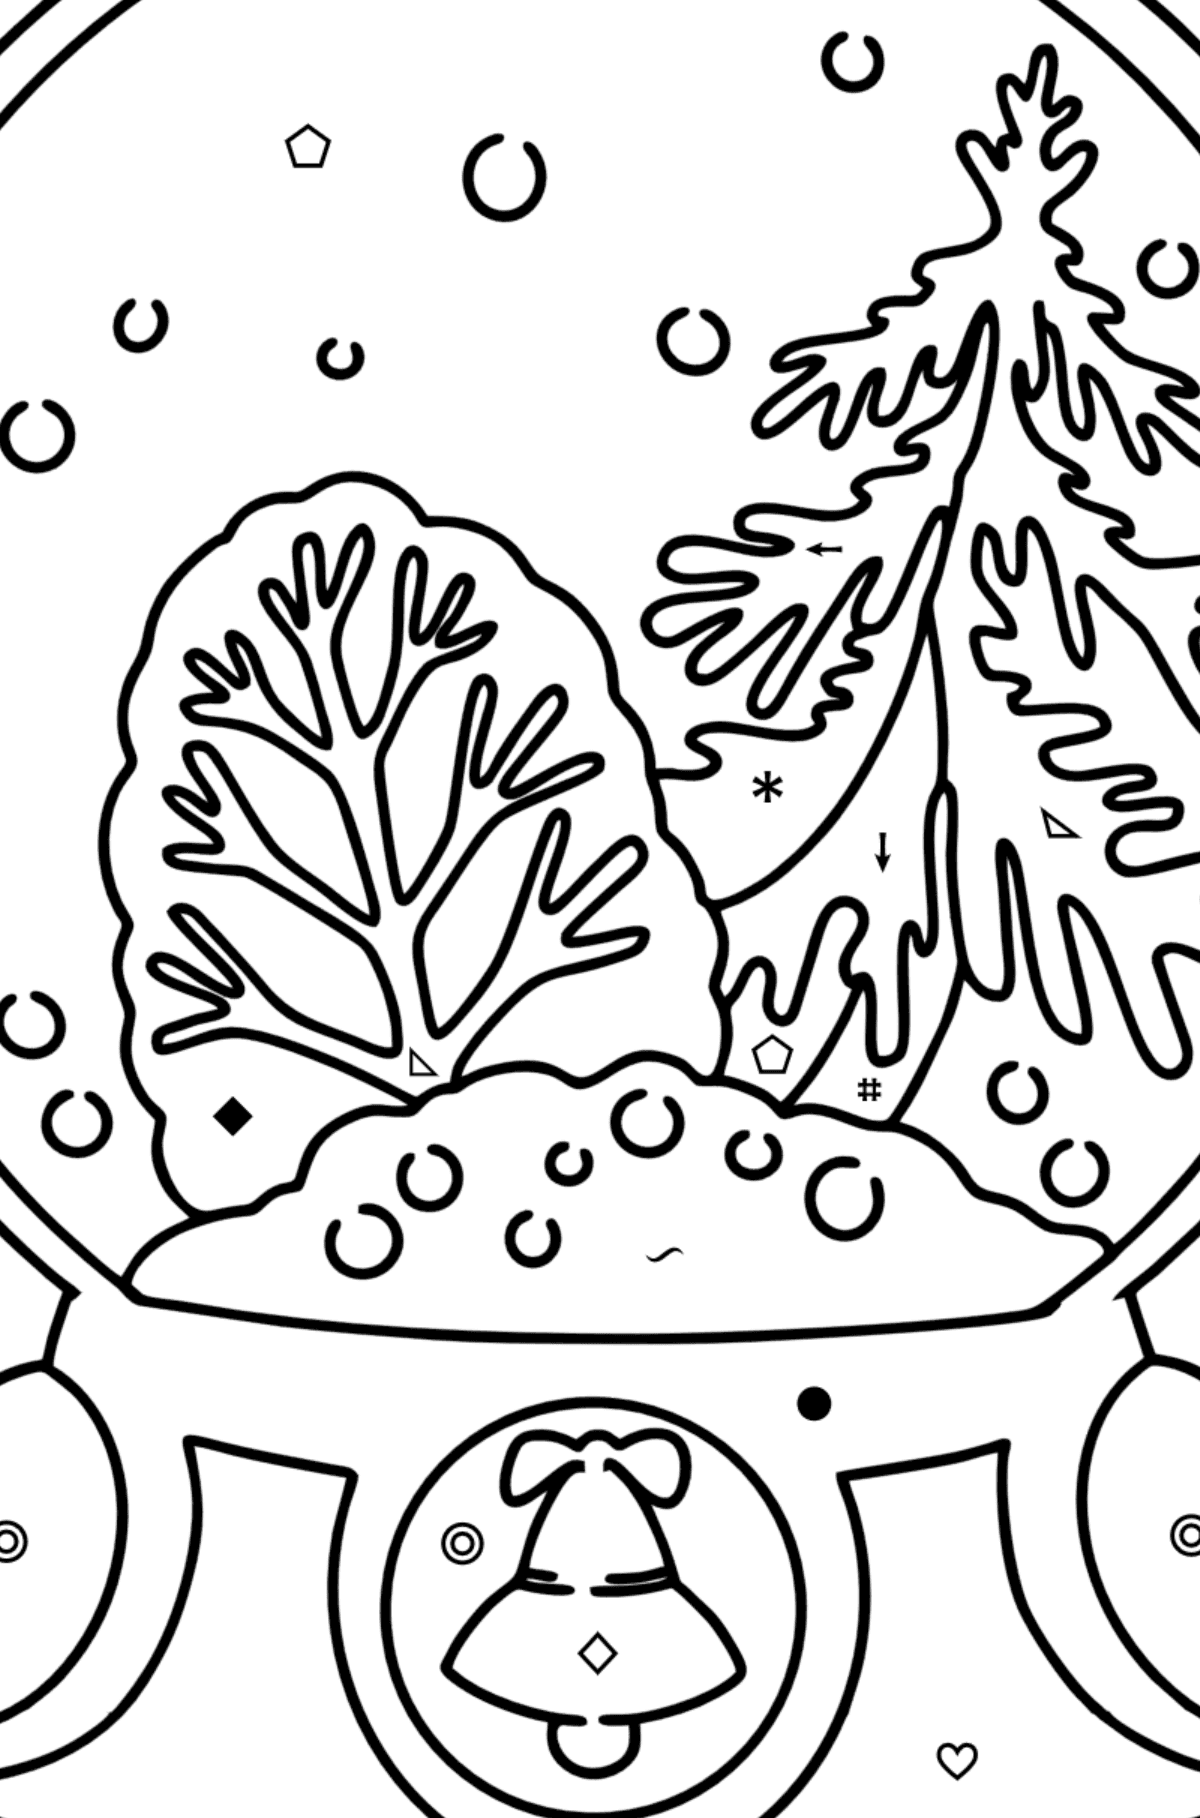 Snow Globe coloring page - Coloring by Symbols and Geometric Shapes for Kids